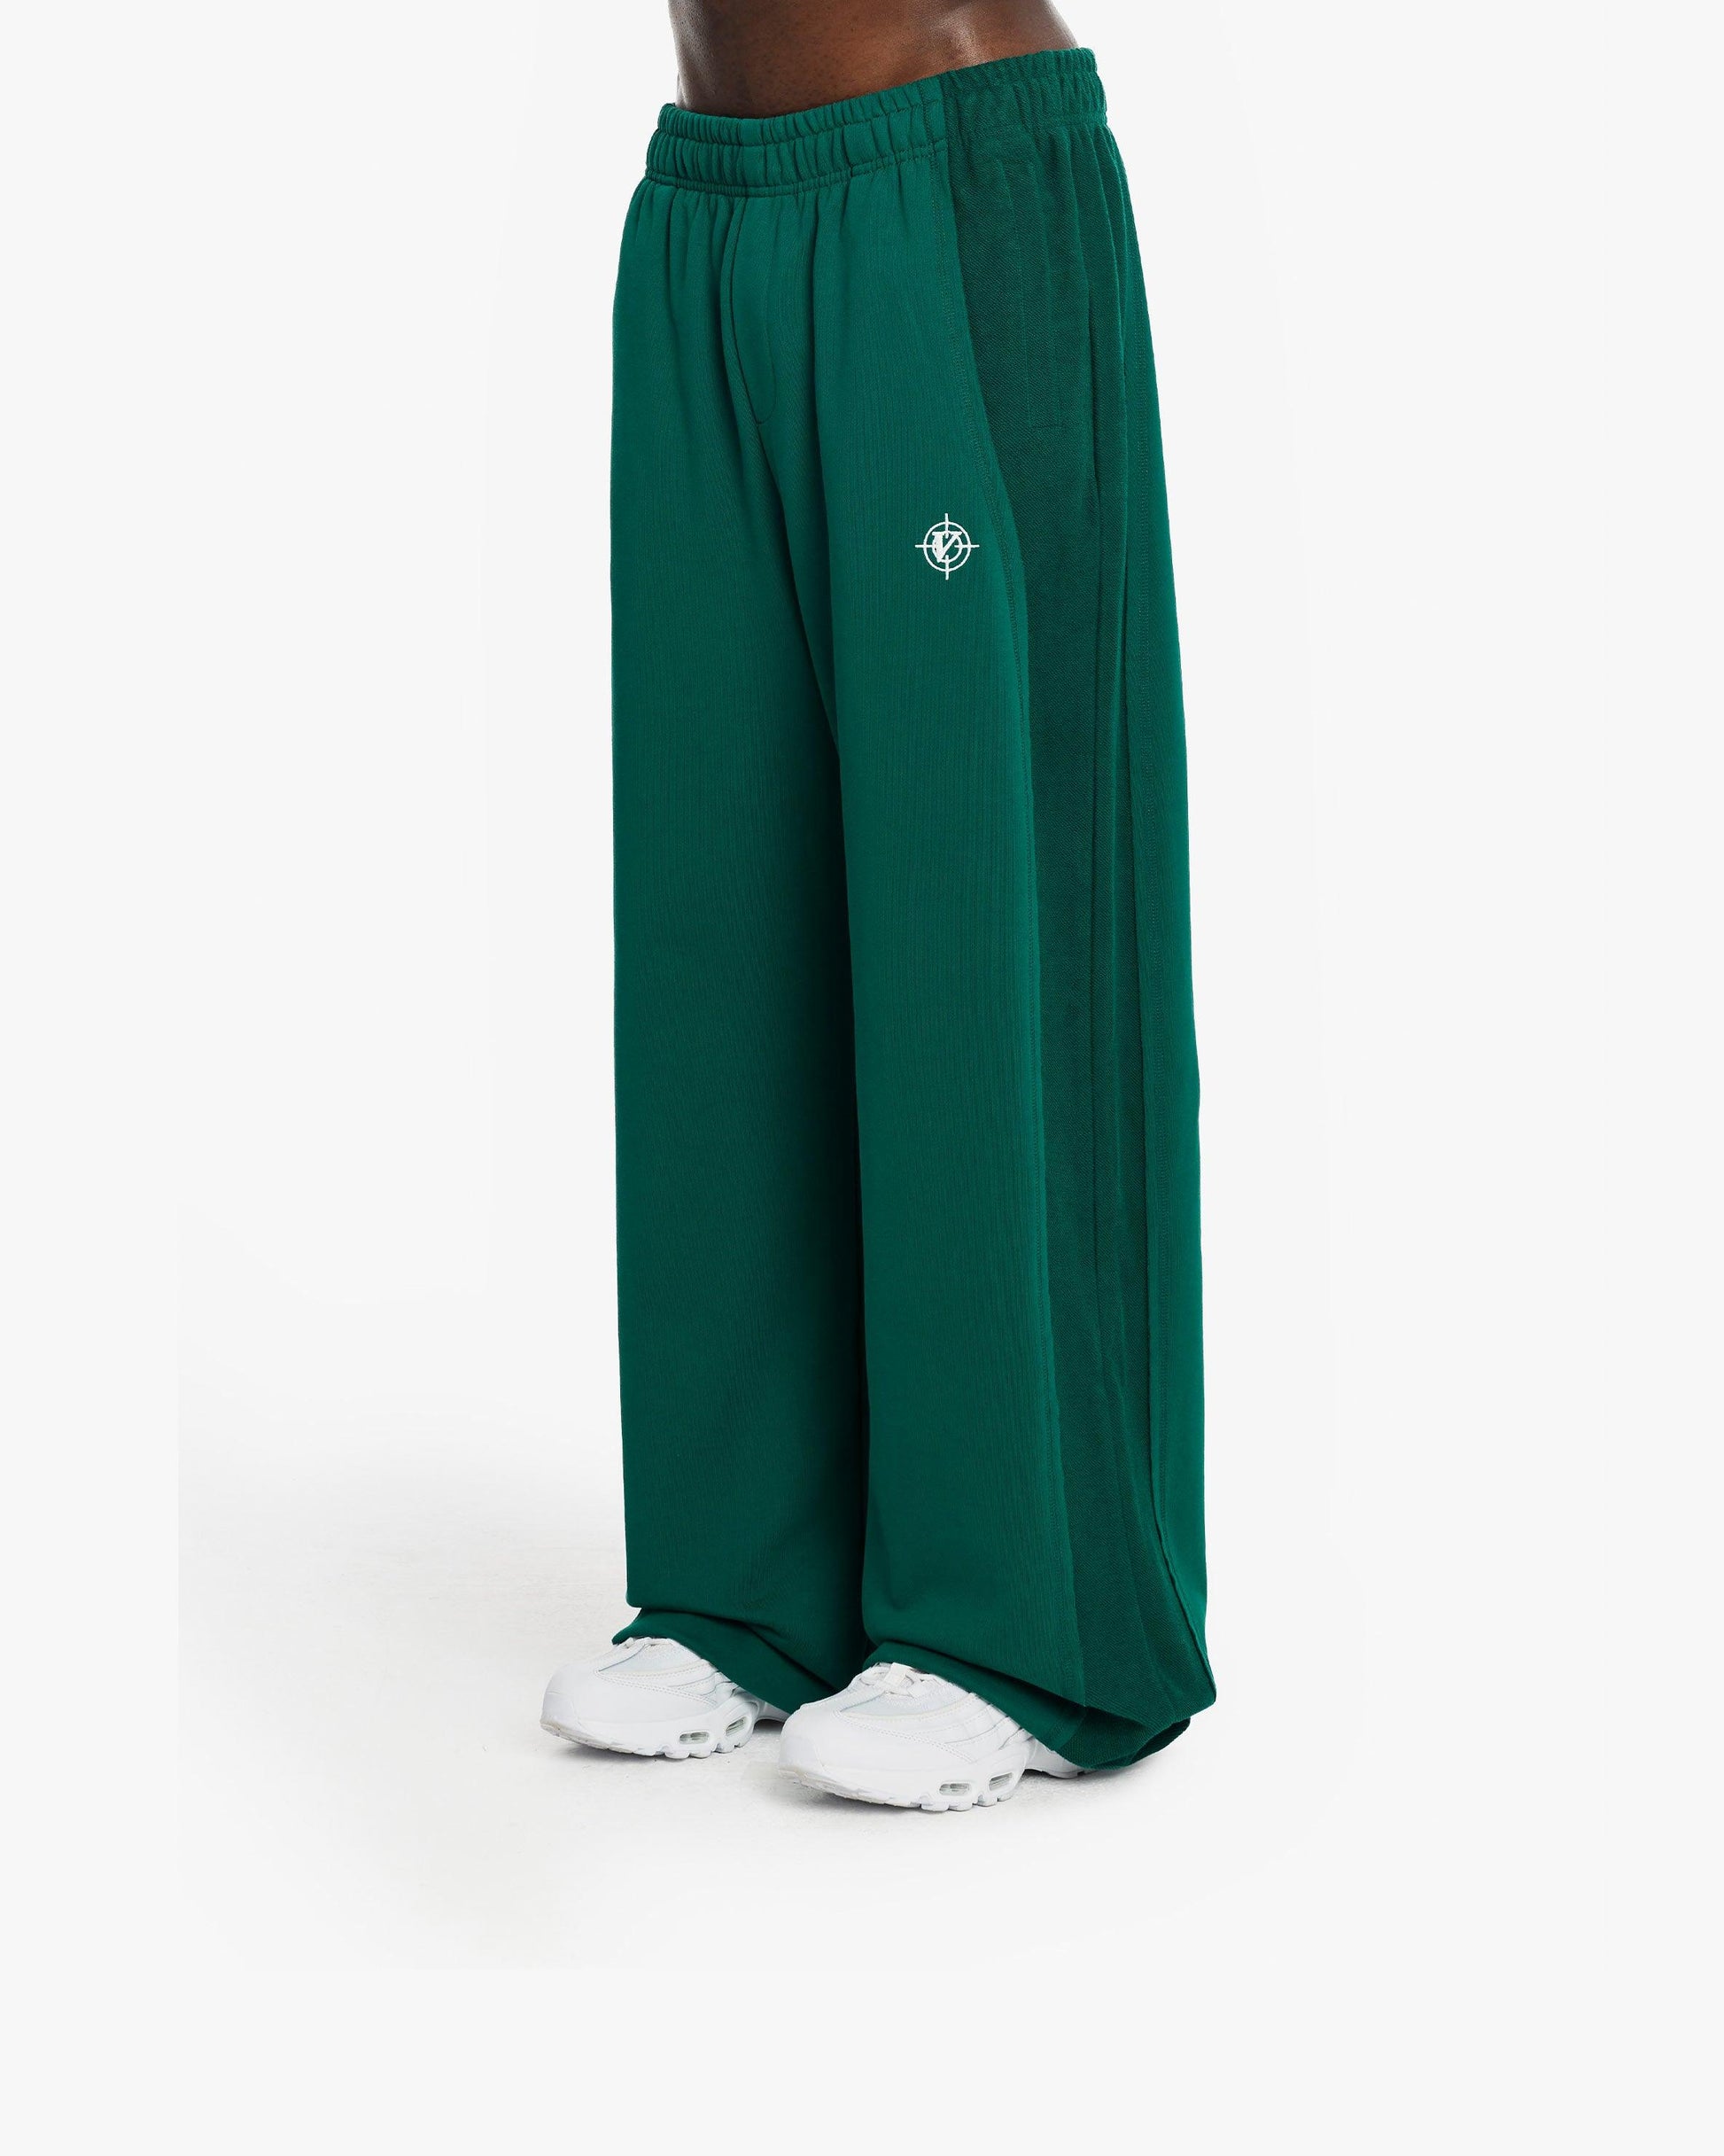 INSIDE OUT JOGGER FORREST GREEN - VICINITY